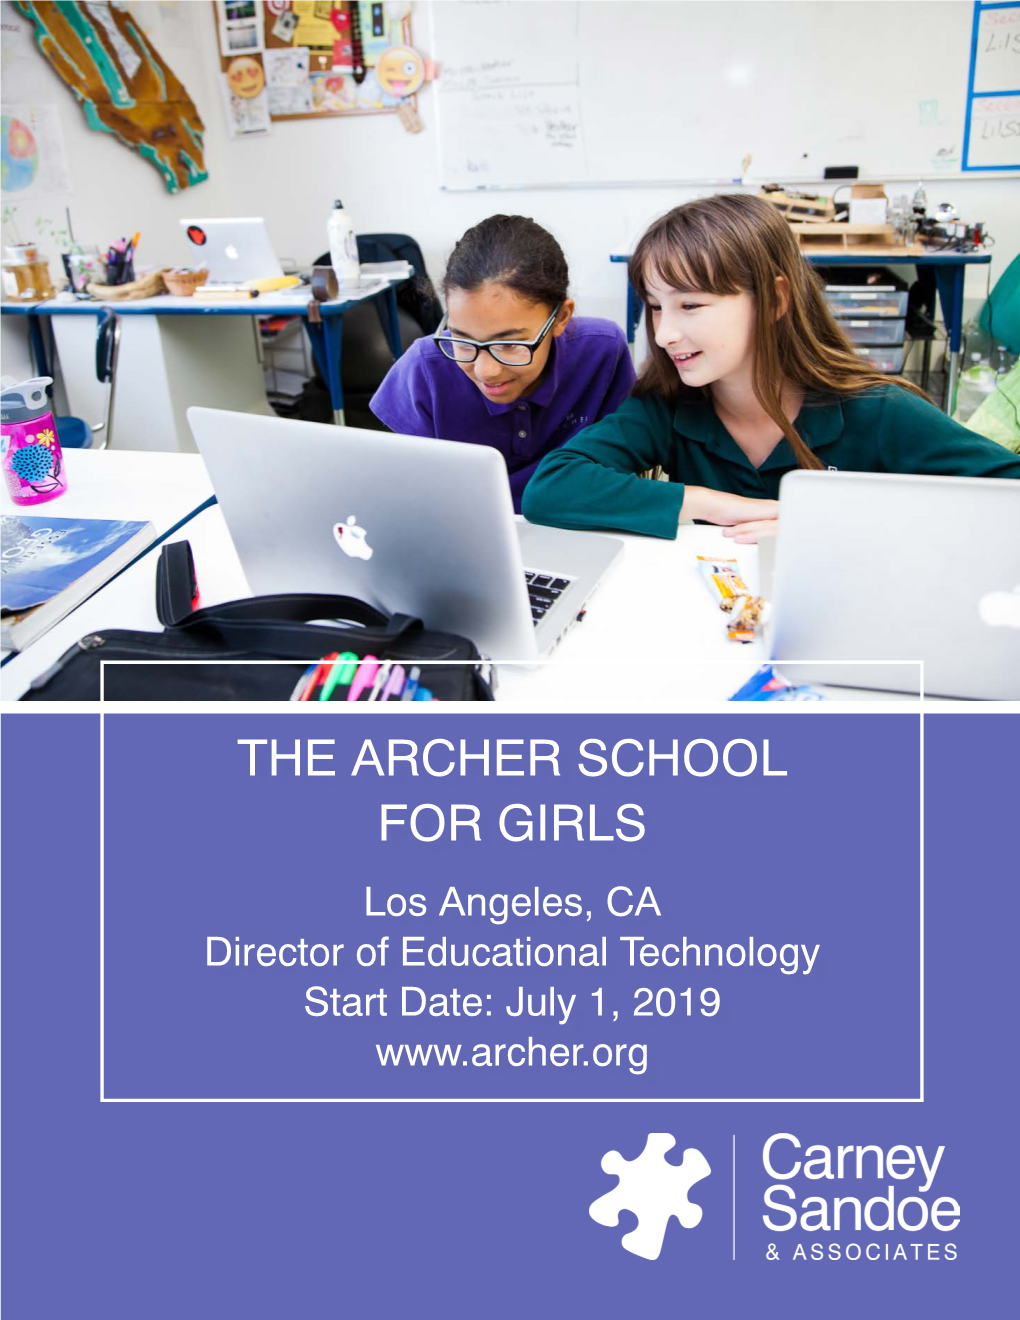 The Archer School for Girls